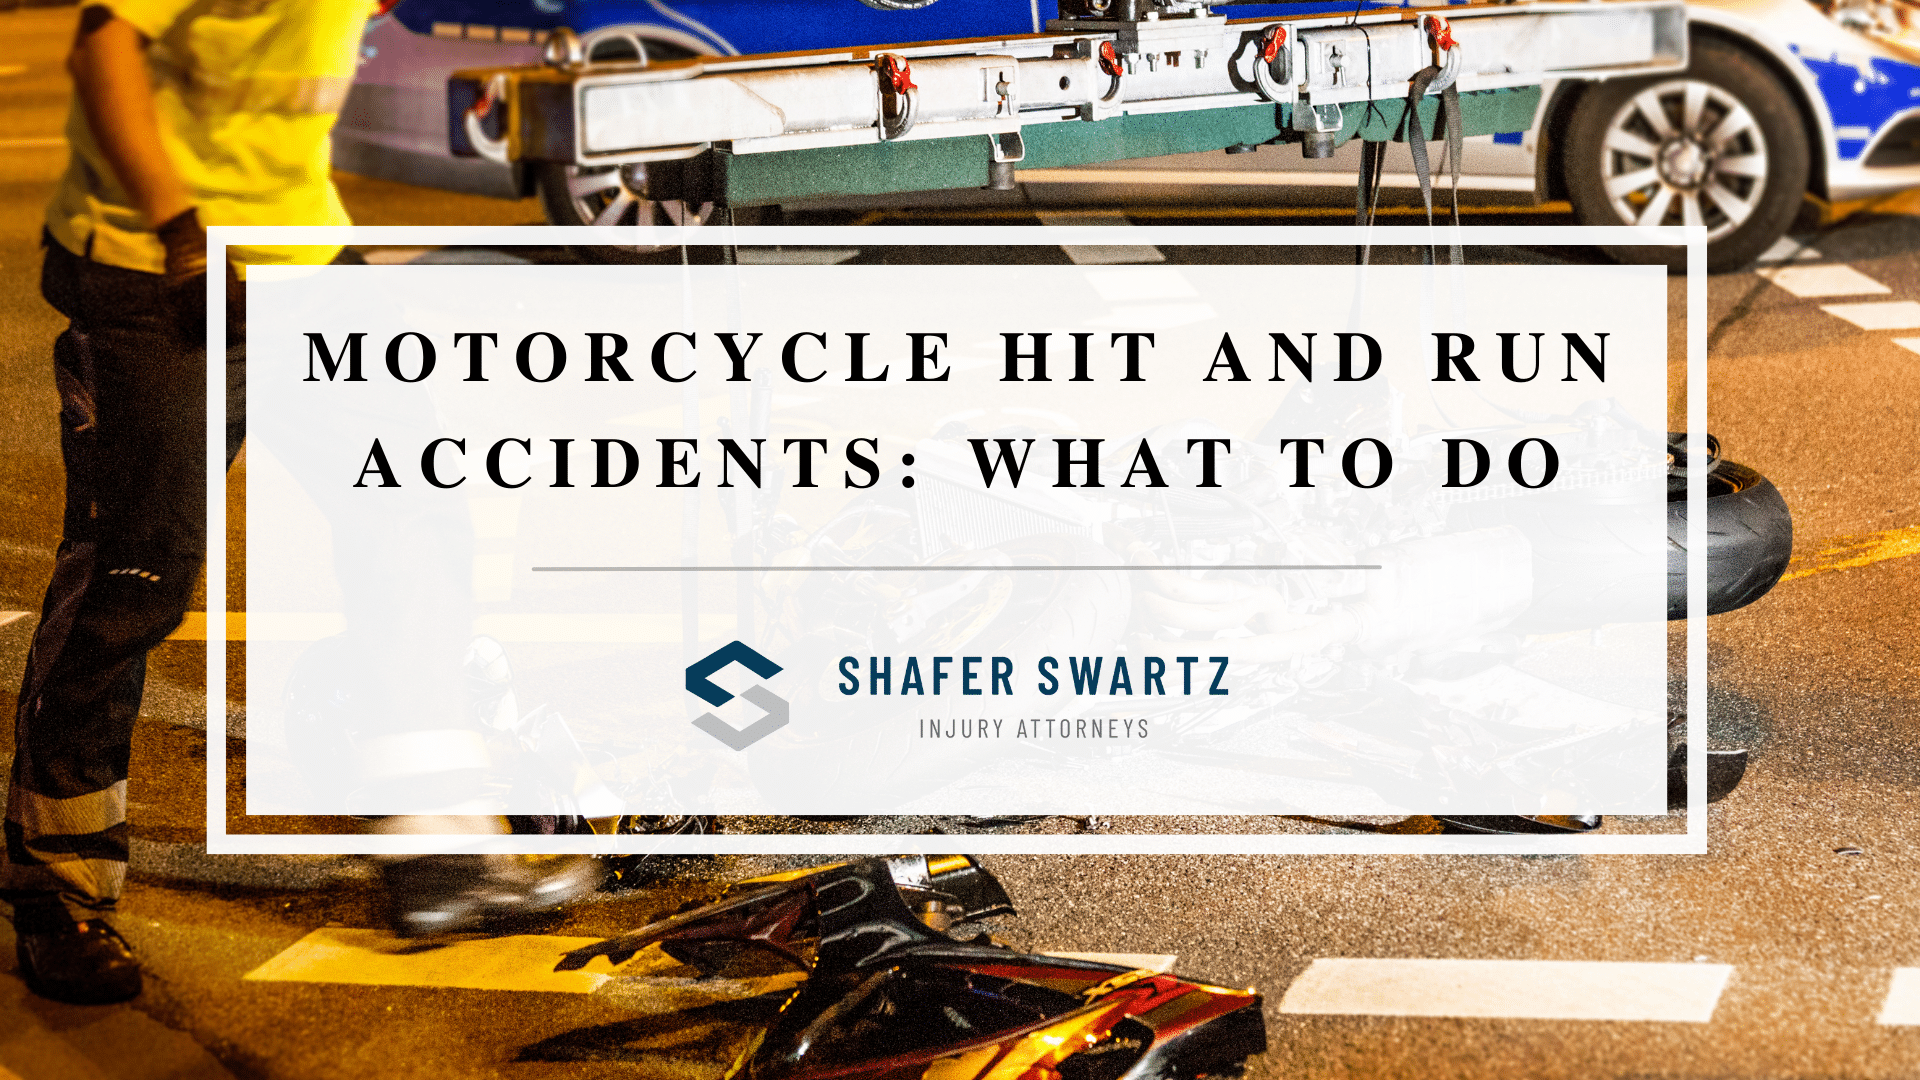 Featured image of motorcycle hit and run accidents